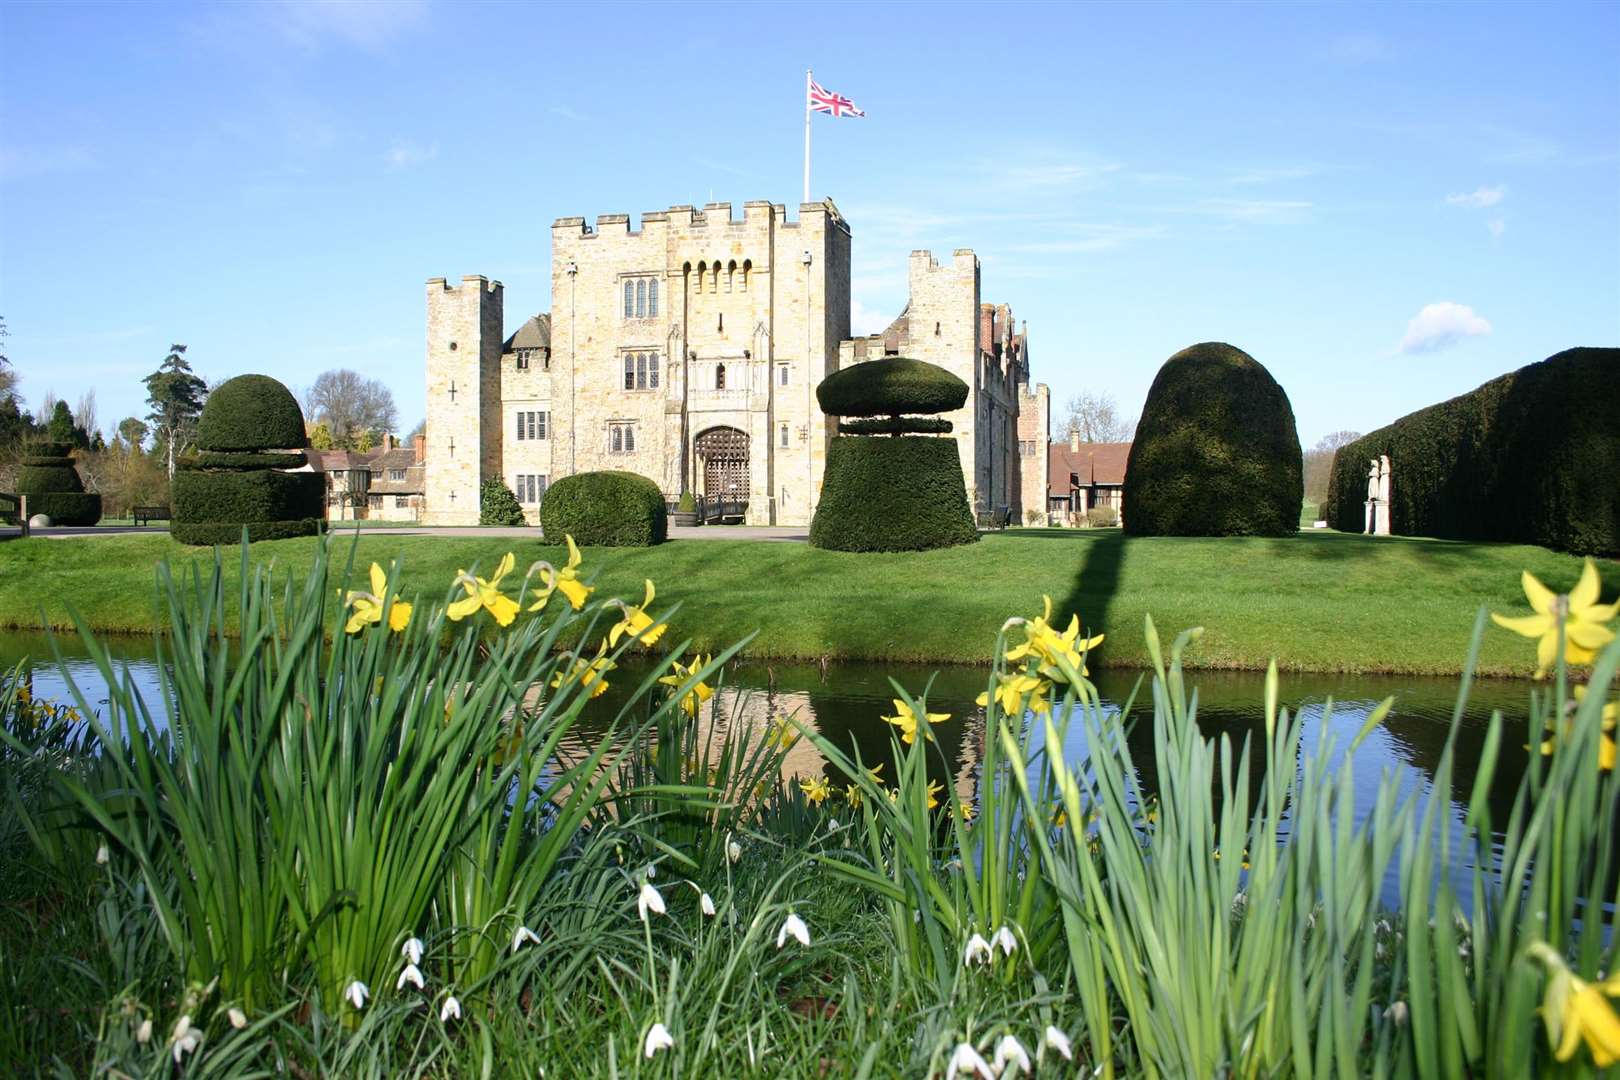 Easter at Hever Castle